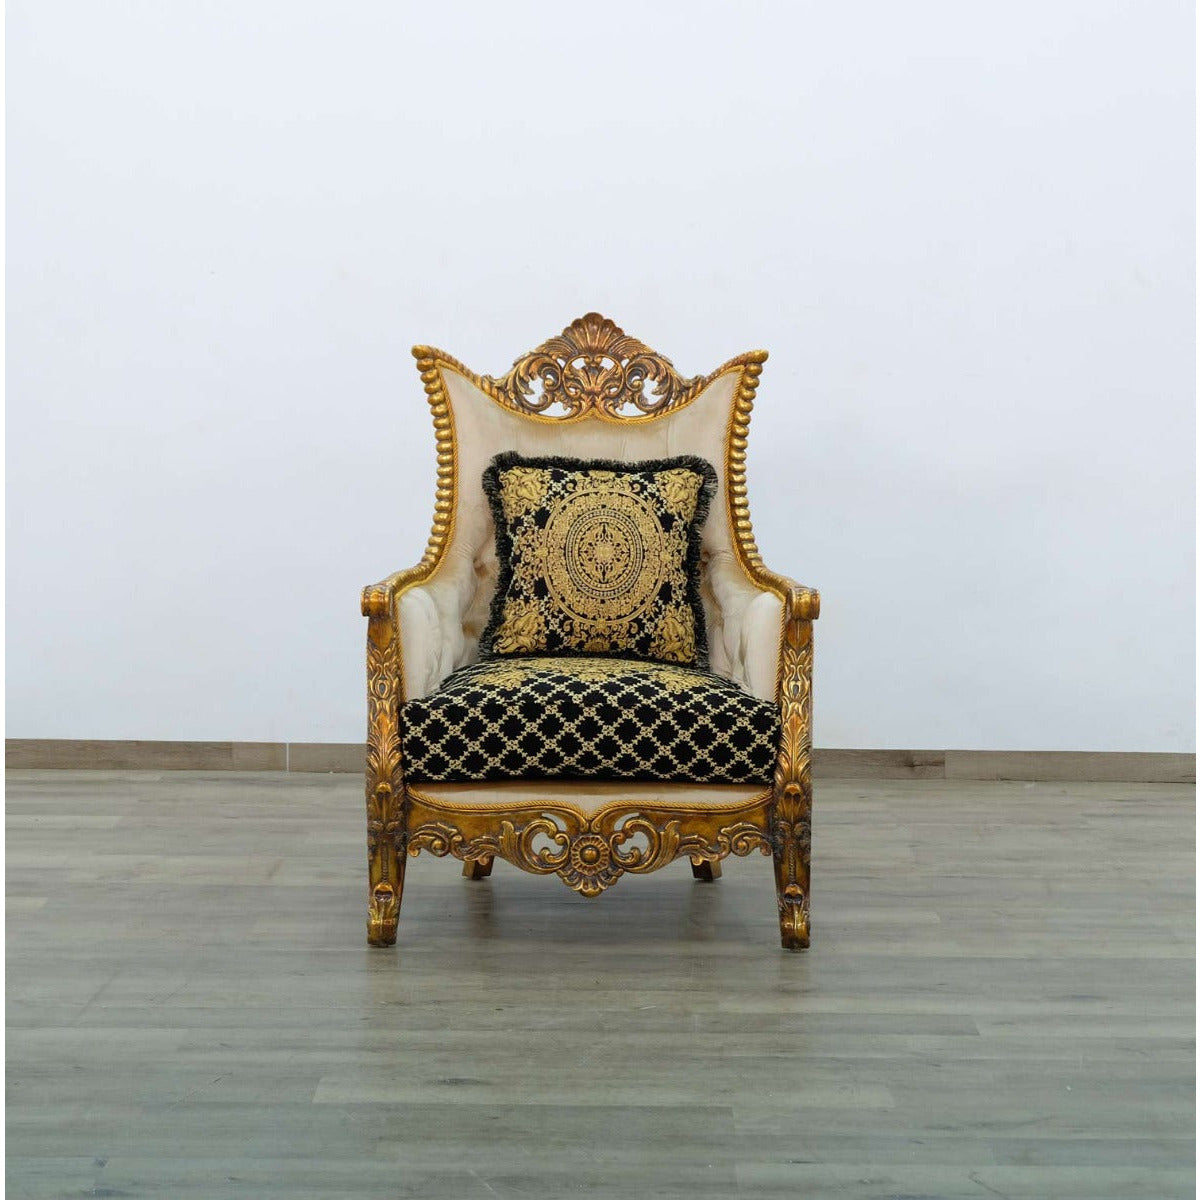 European Furniture - Maggiolini II Chair in Black and Gold - 31059-C - New Star Living